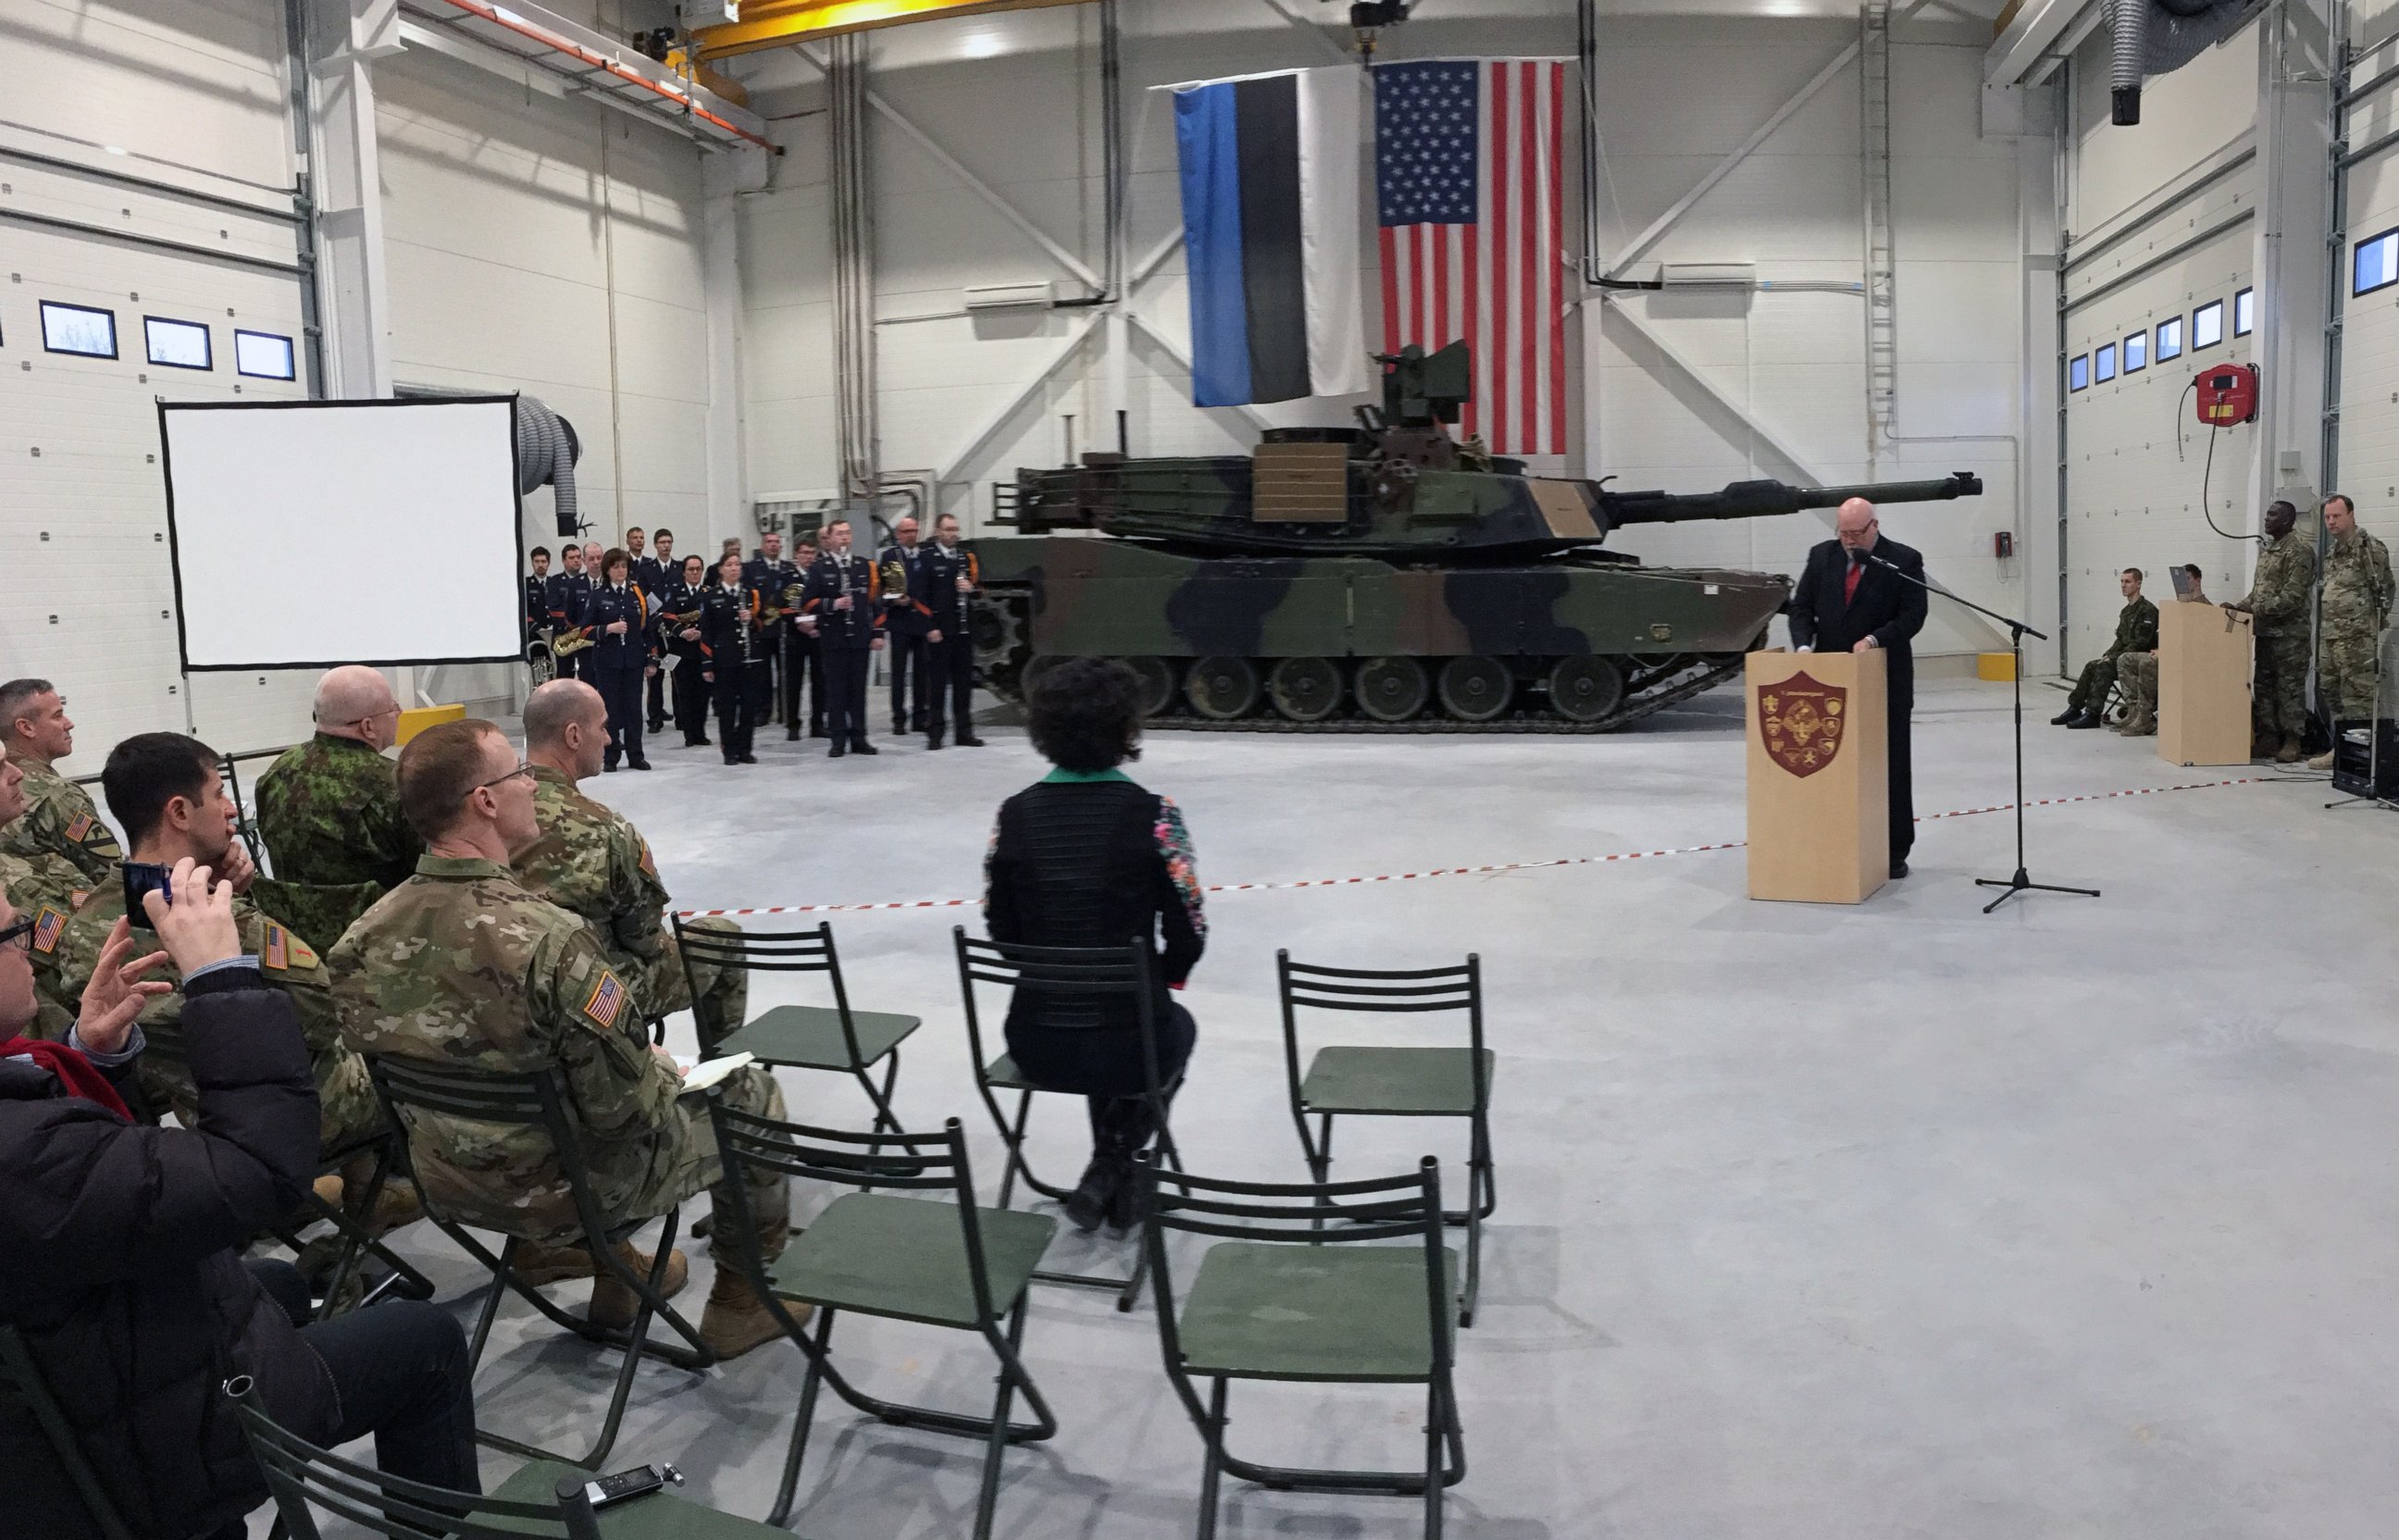 U.S. Ambassador to Estonia James D. Melville Jr. addresses dignitaries in front of an U.S. Army tank, at a hand-over ceremony of the upgraded NATO military base in Tapa, Estonia, Thursday, Dec. 15, 2016.